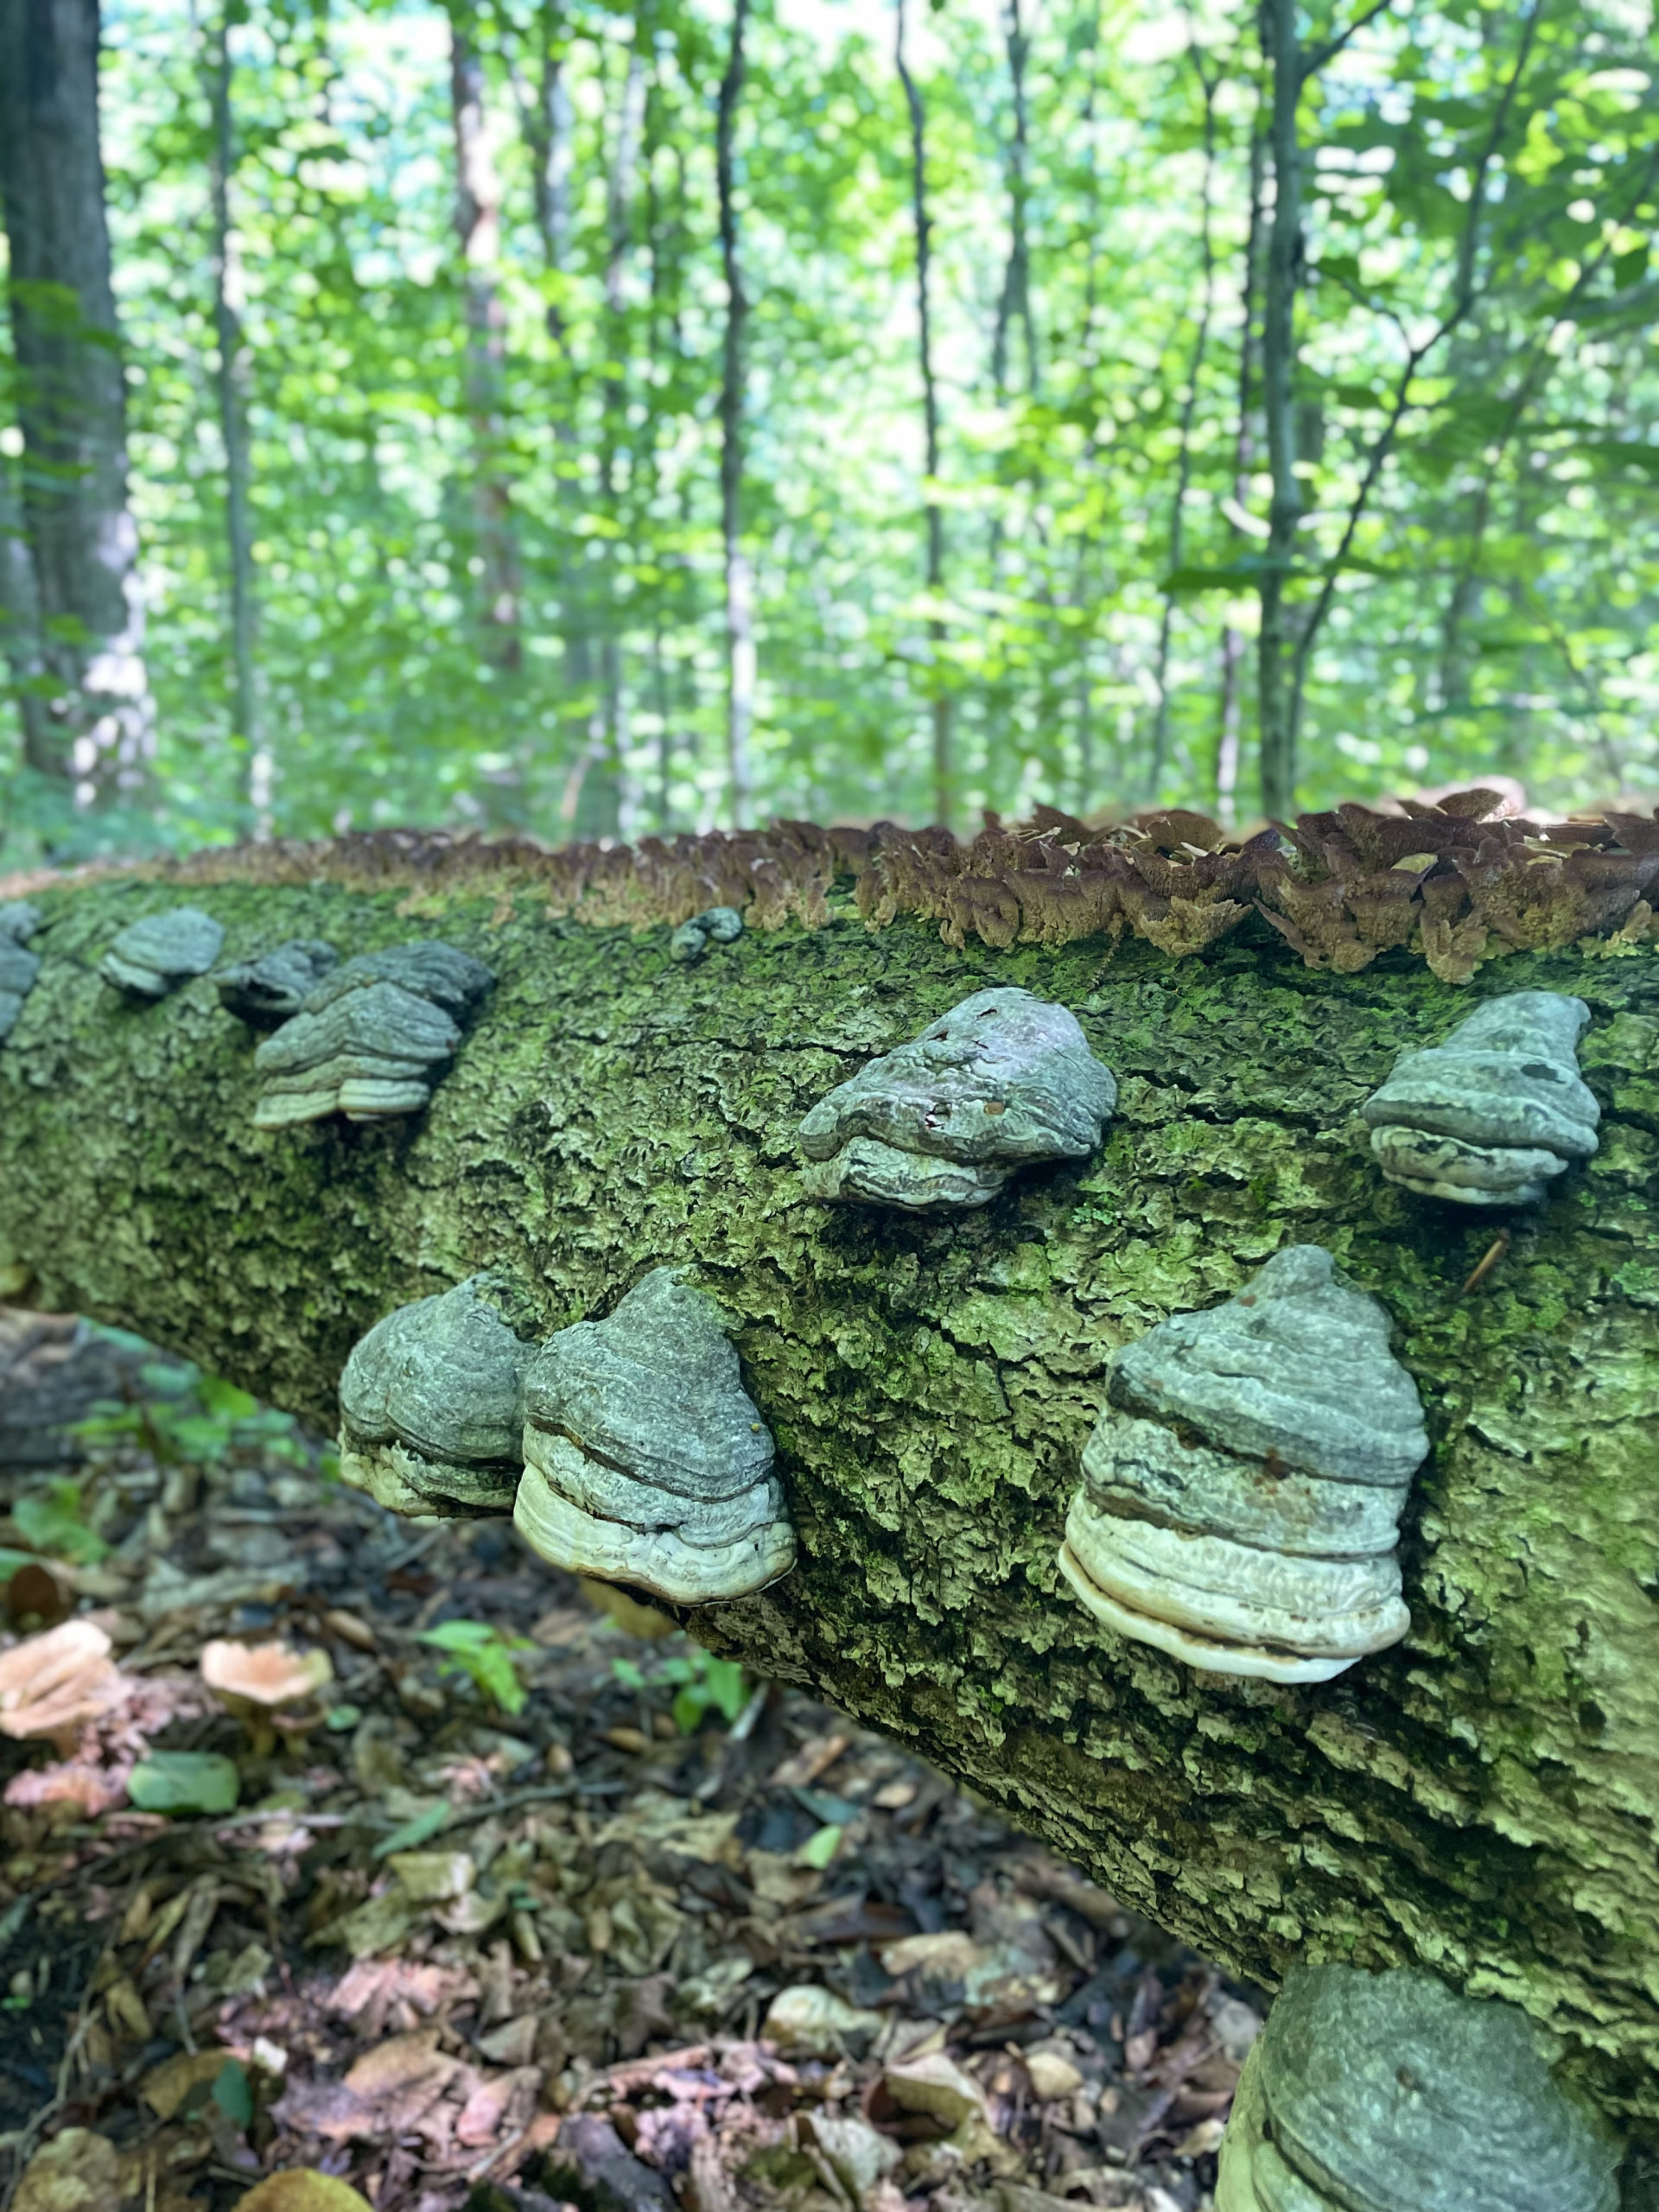 Fungus on a log, seen while hiking Owl's Head Mtn in the White Mountain National Forest, New Hampshire